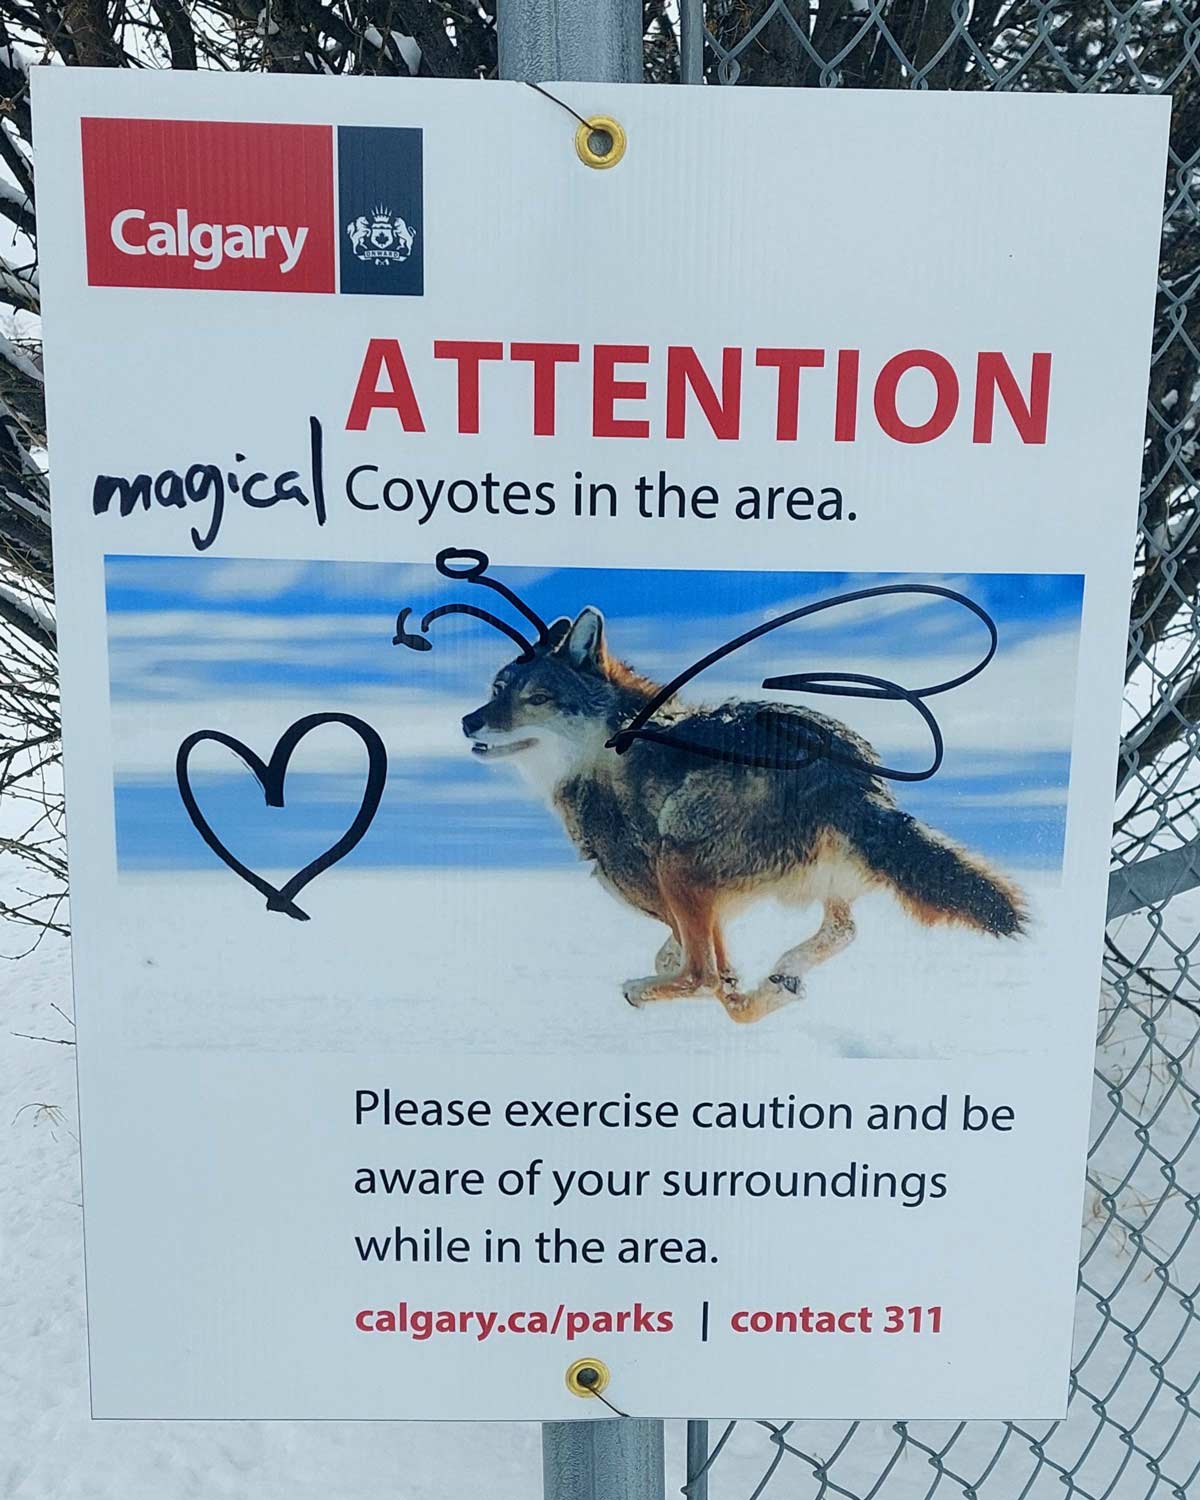 Saw some Canadian vandalism on a walk